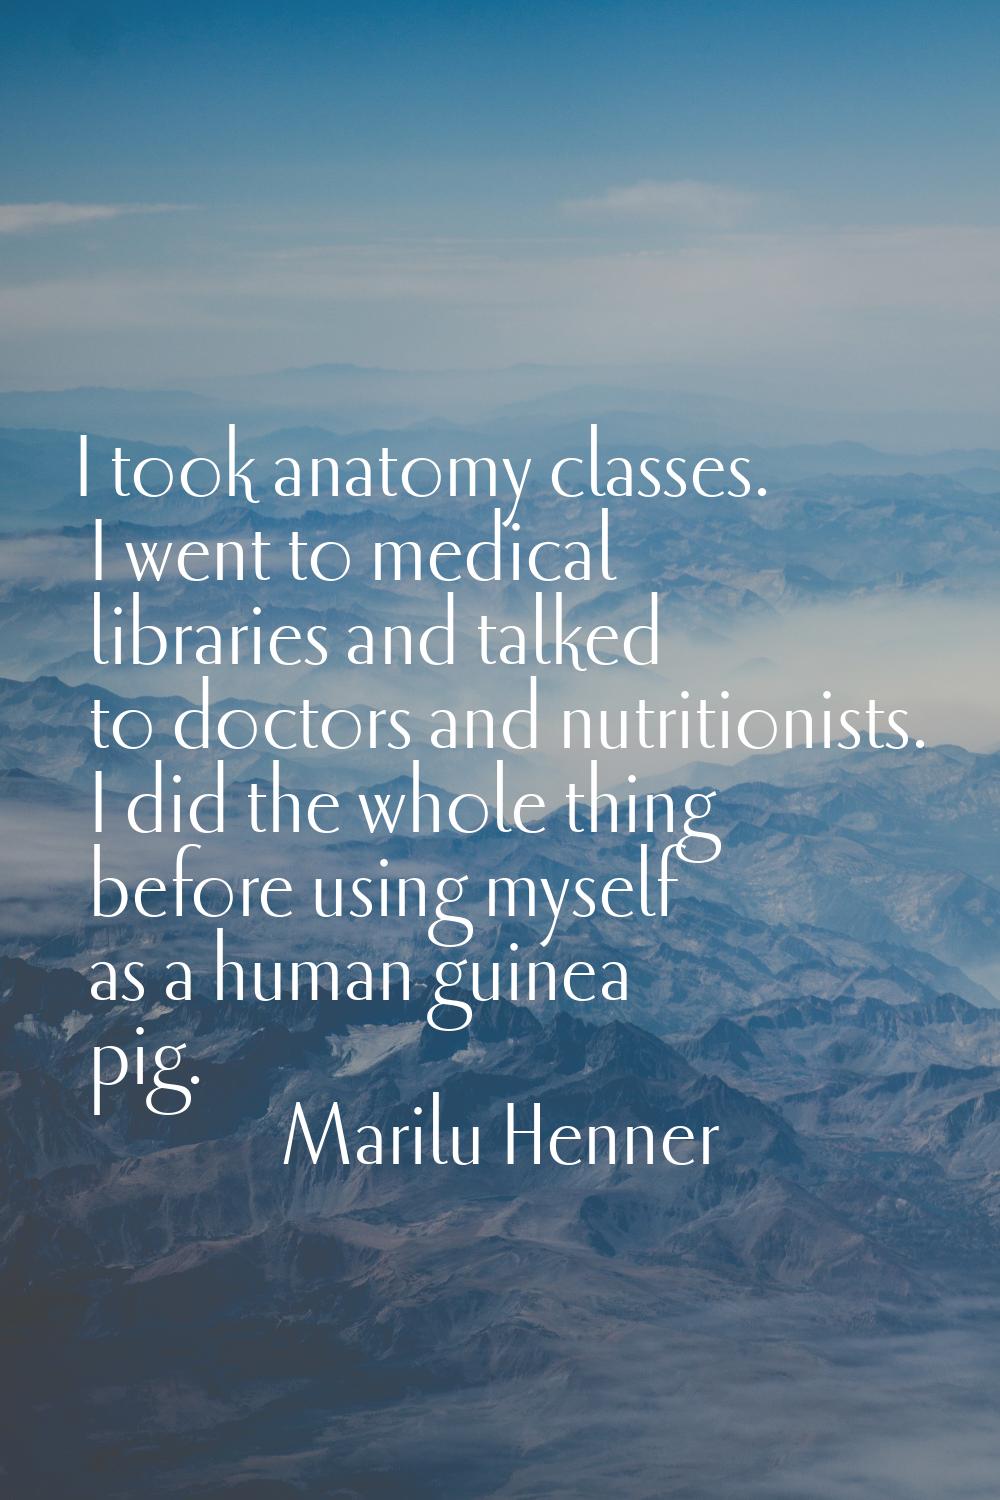 I took anatomy classes. I went to medical libraries and talked to doctors and nutritionists. I did 